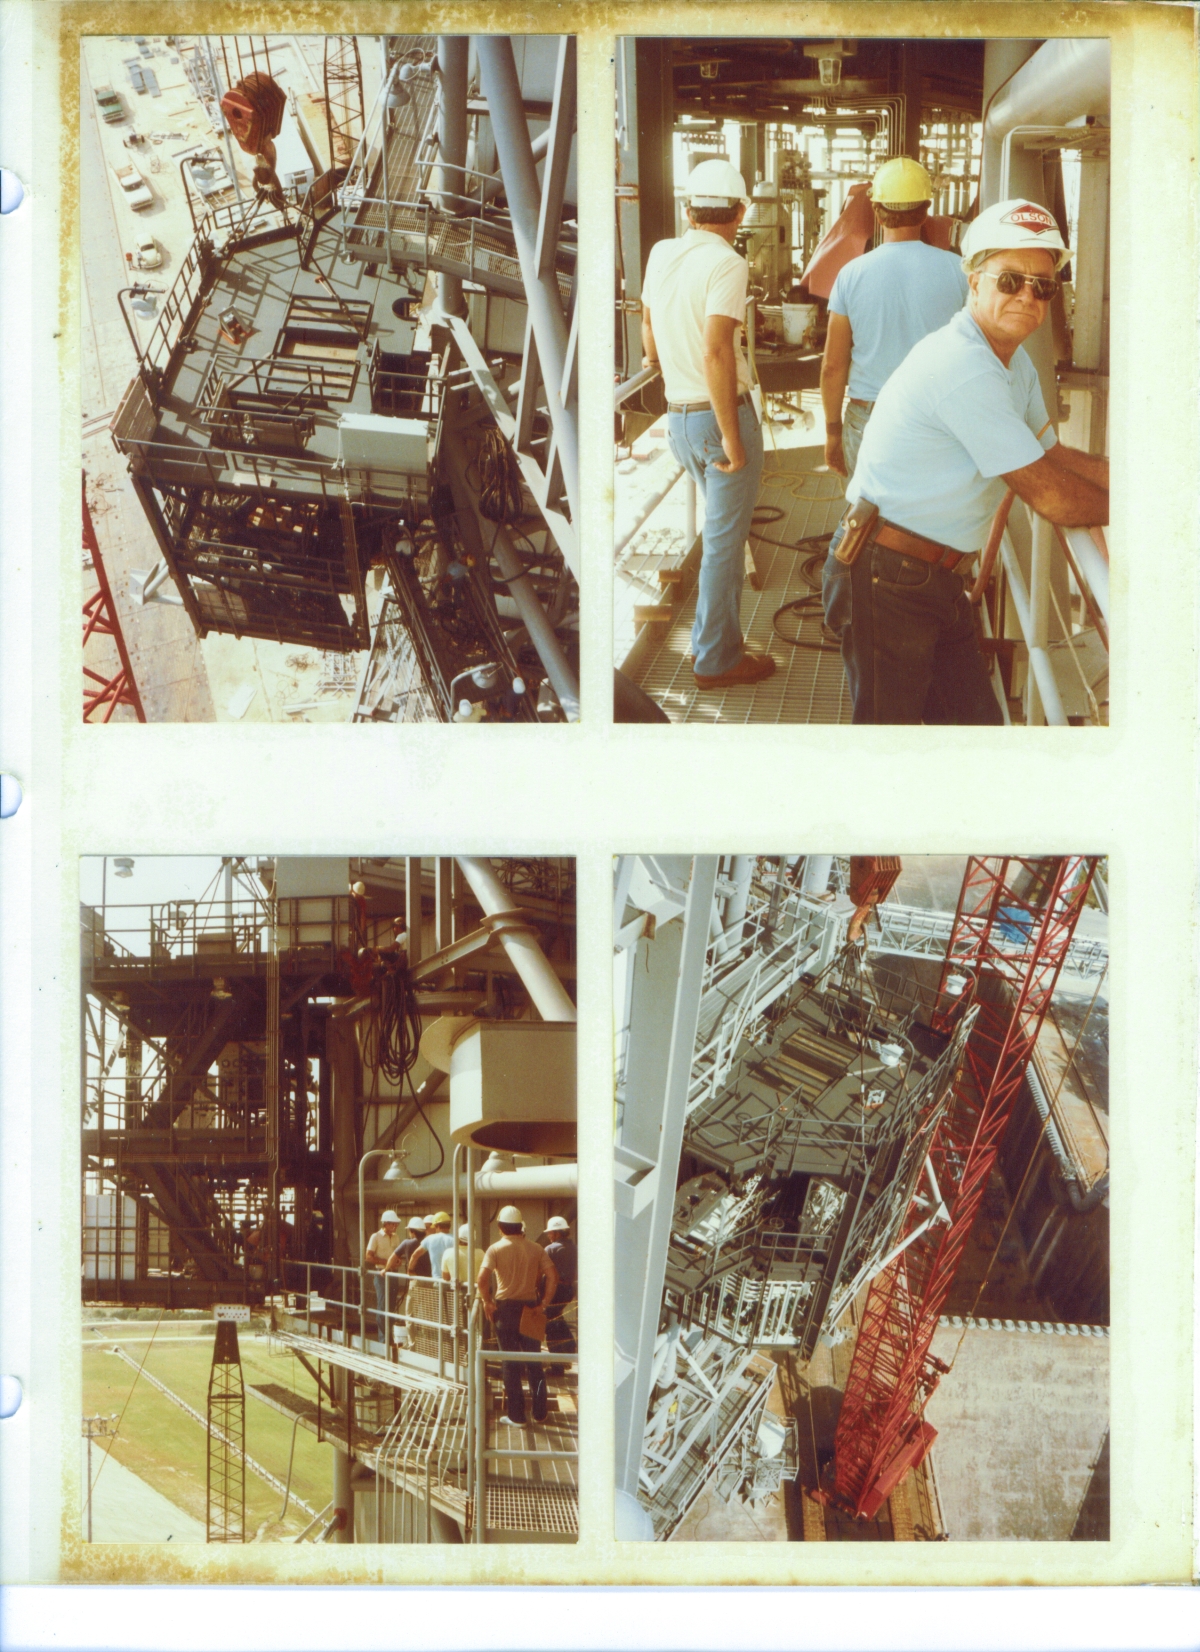 The Orbiter Mid Body Umbilical Unit has been lifted to the place where it will be bolted to the face of the RSS, but it has not yet quite been pulled into contact with the RSS, and remains hanging in suspension from the crane. These images were taken from the RSS and the FSS, and show craft labor and engineering, along with NASA and contractor oversight personnel, closely examining things prior to the final mate and bolt-down of the OMBUU.